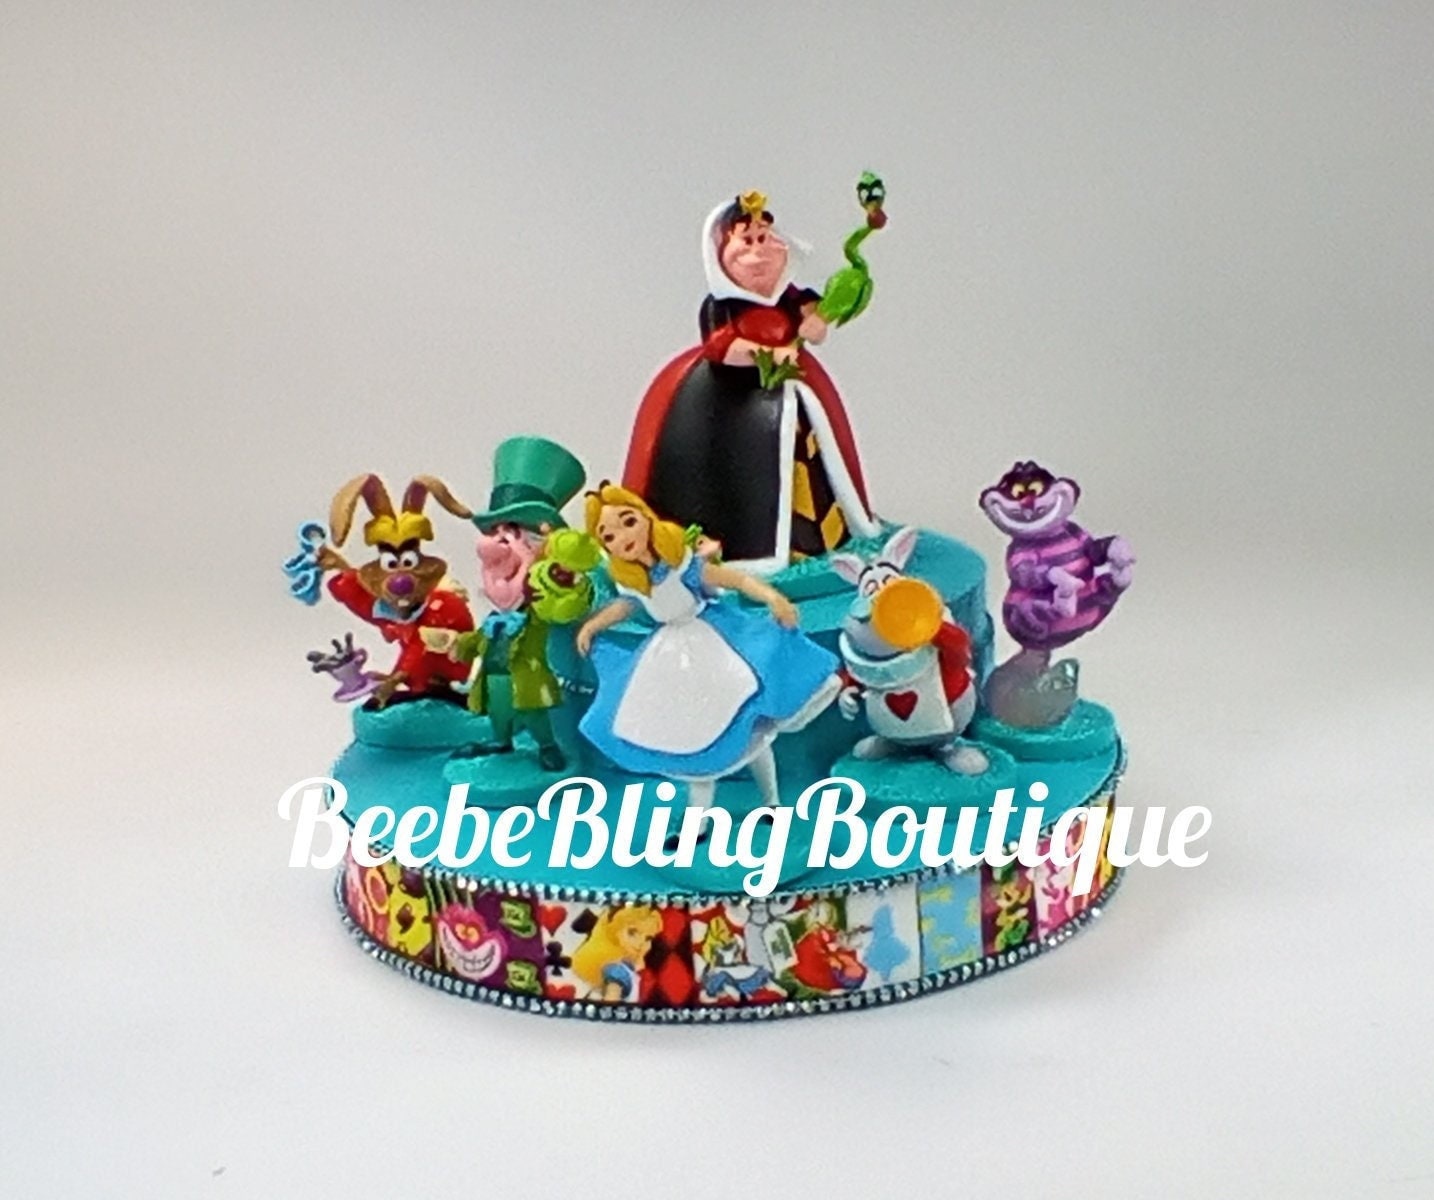 Elegant Adventures in Wonderland Fondant Cake Toppers, Perfect for Alice,  Tea Cup and Saucer, Roses, Pocket Watch, Key, Bridal Shower Cake